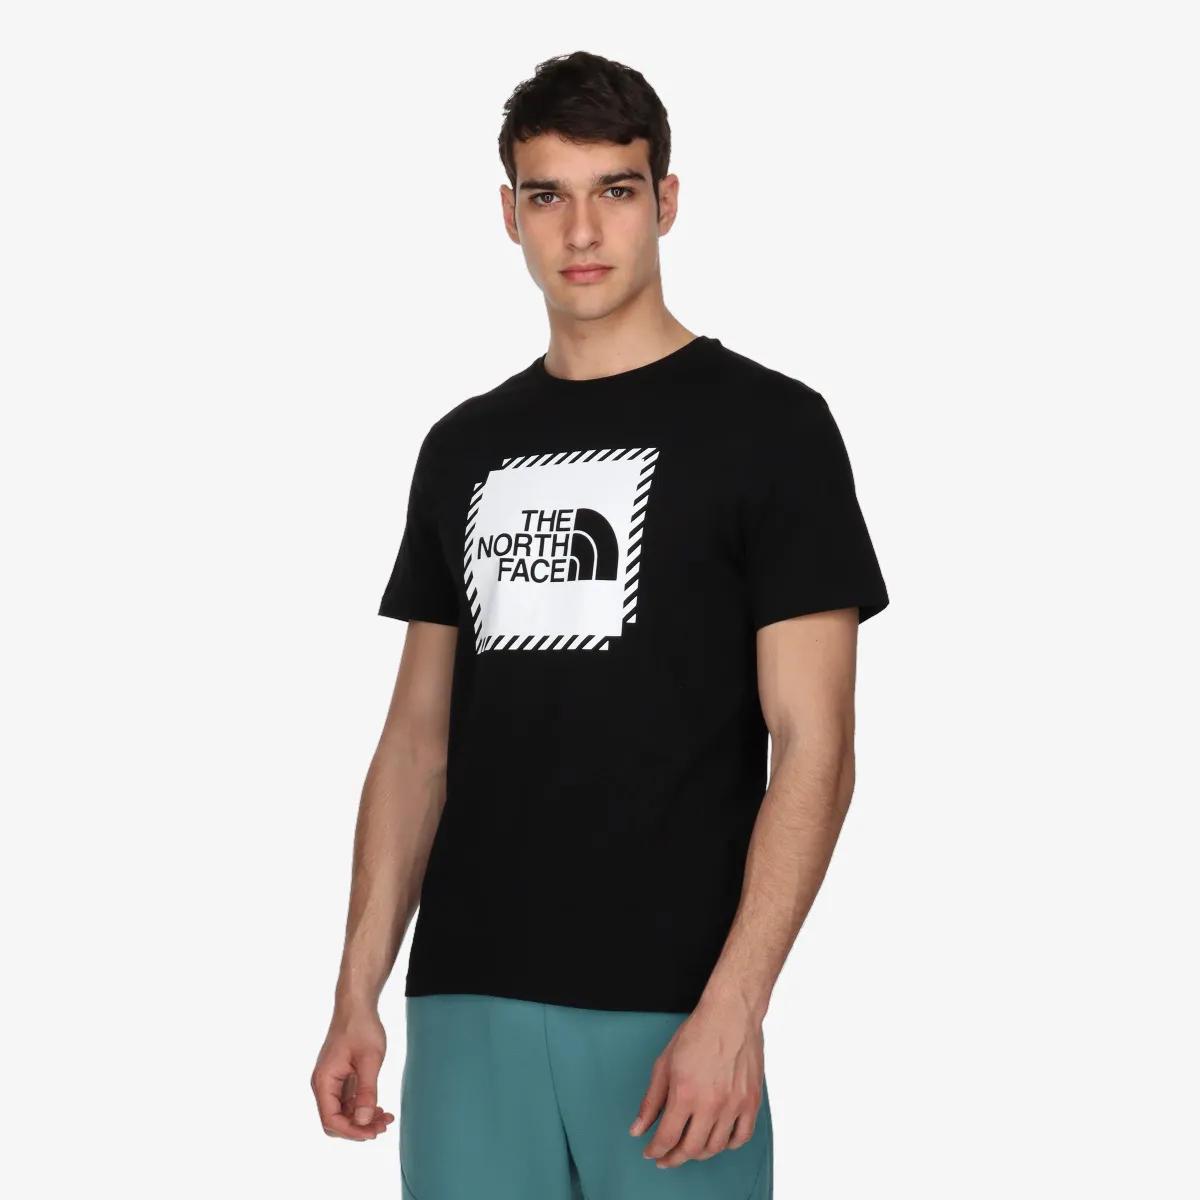 THE NORTH FACE MEN’S BINER GRAPHIC 2 TEE 